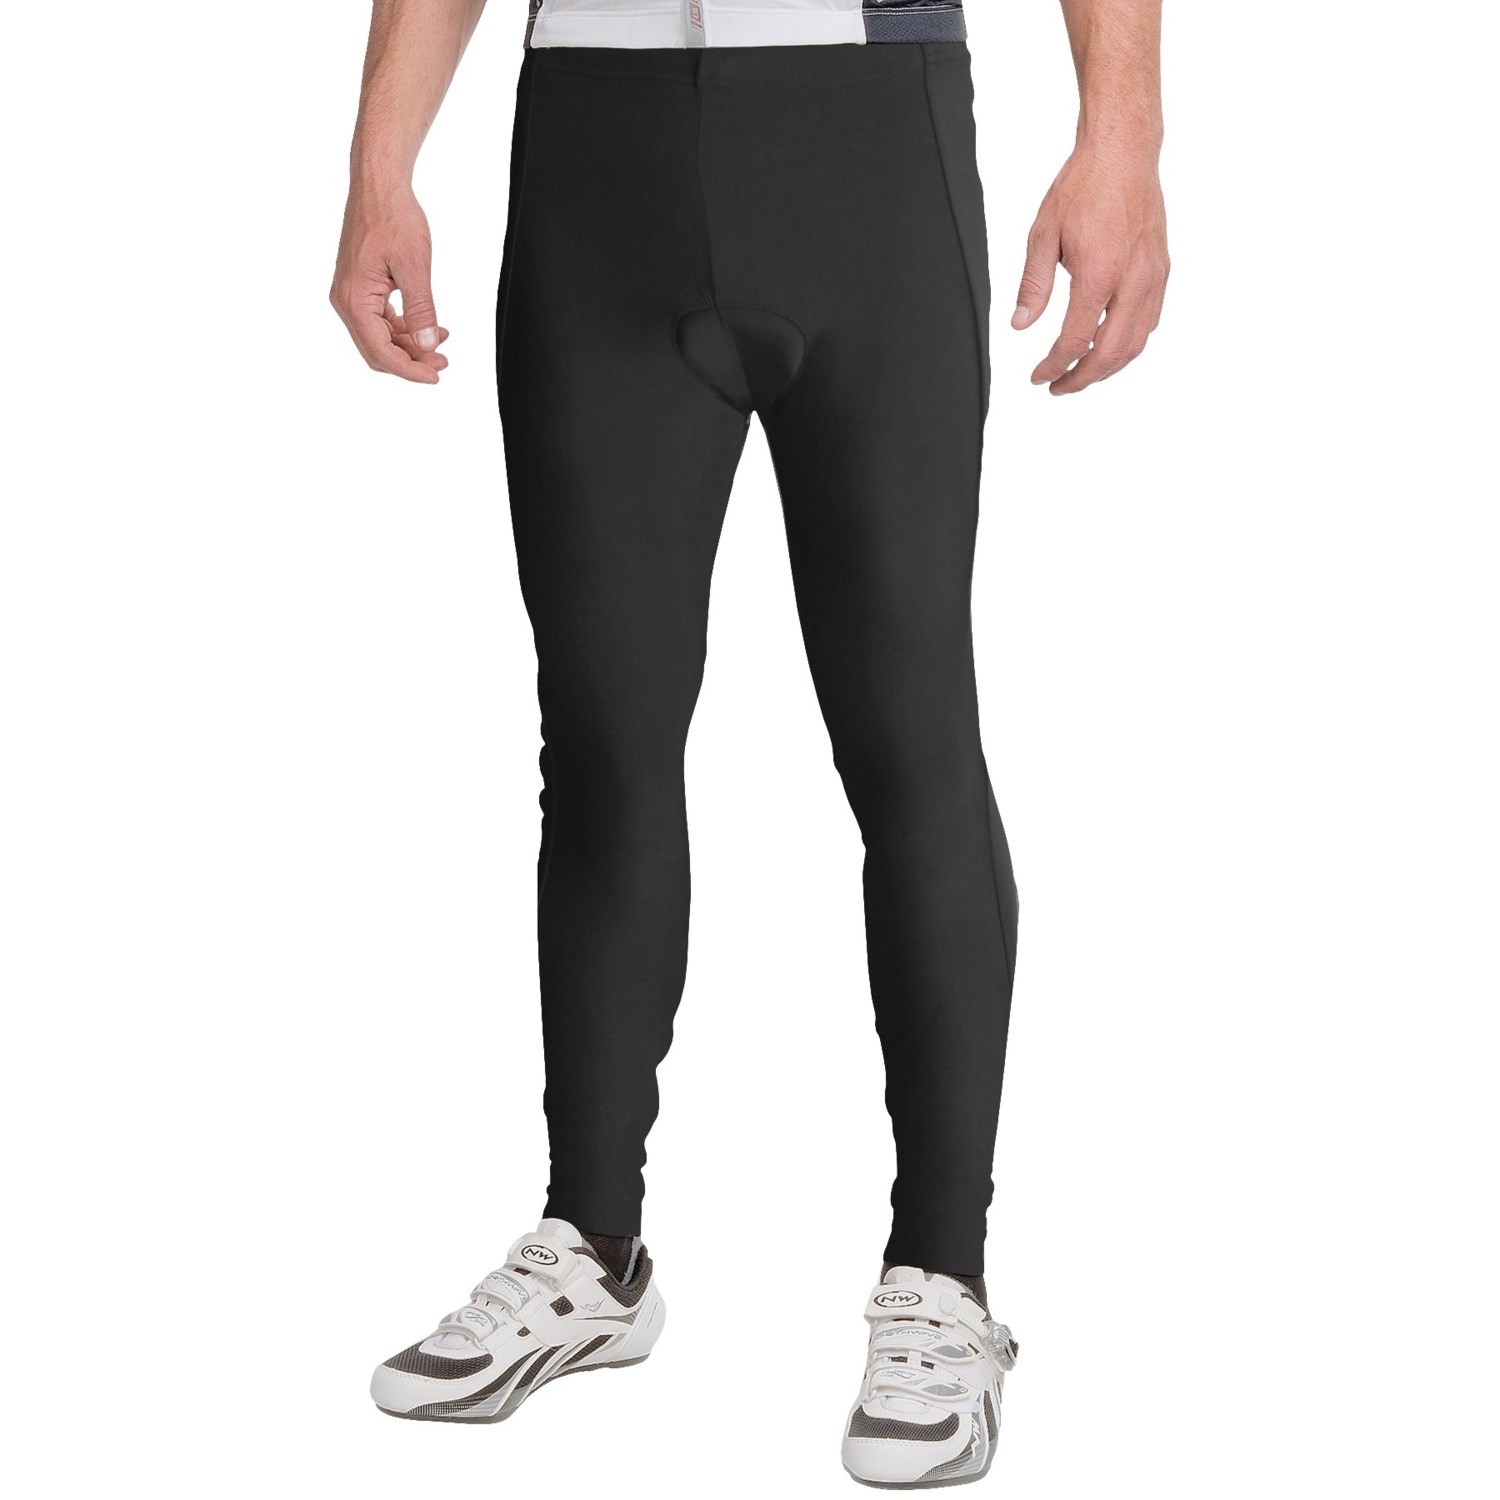 Canari Veloce Pro Cycling Tights (For Men) - Save 71%